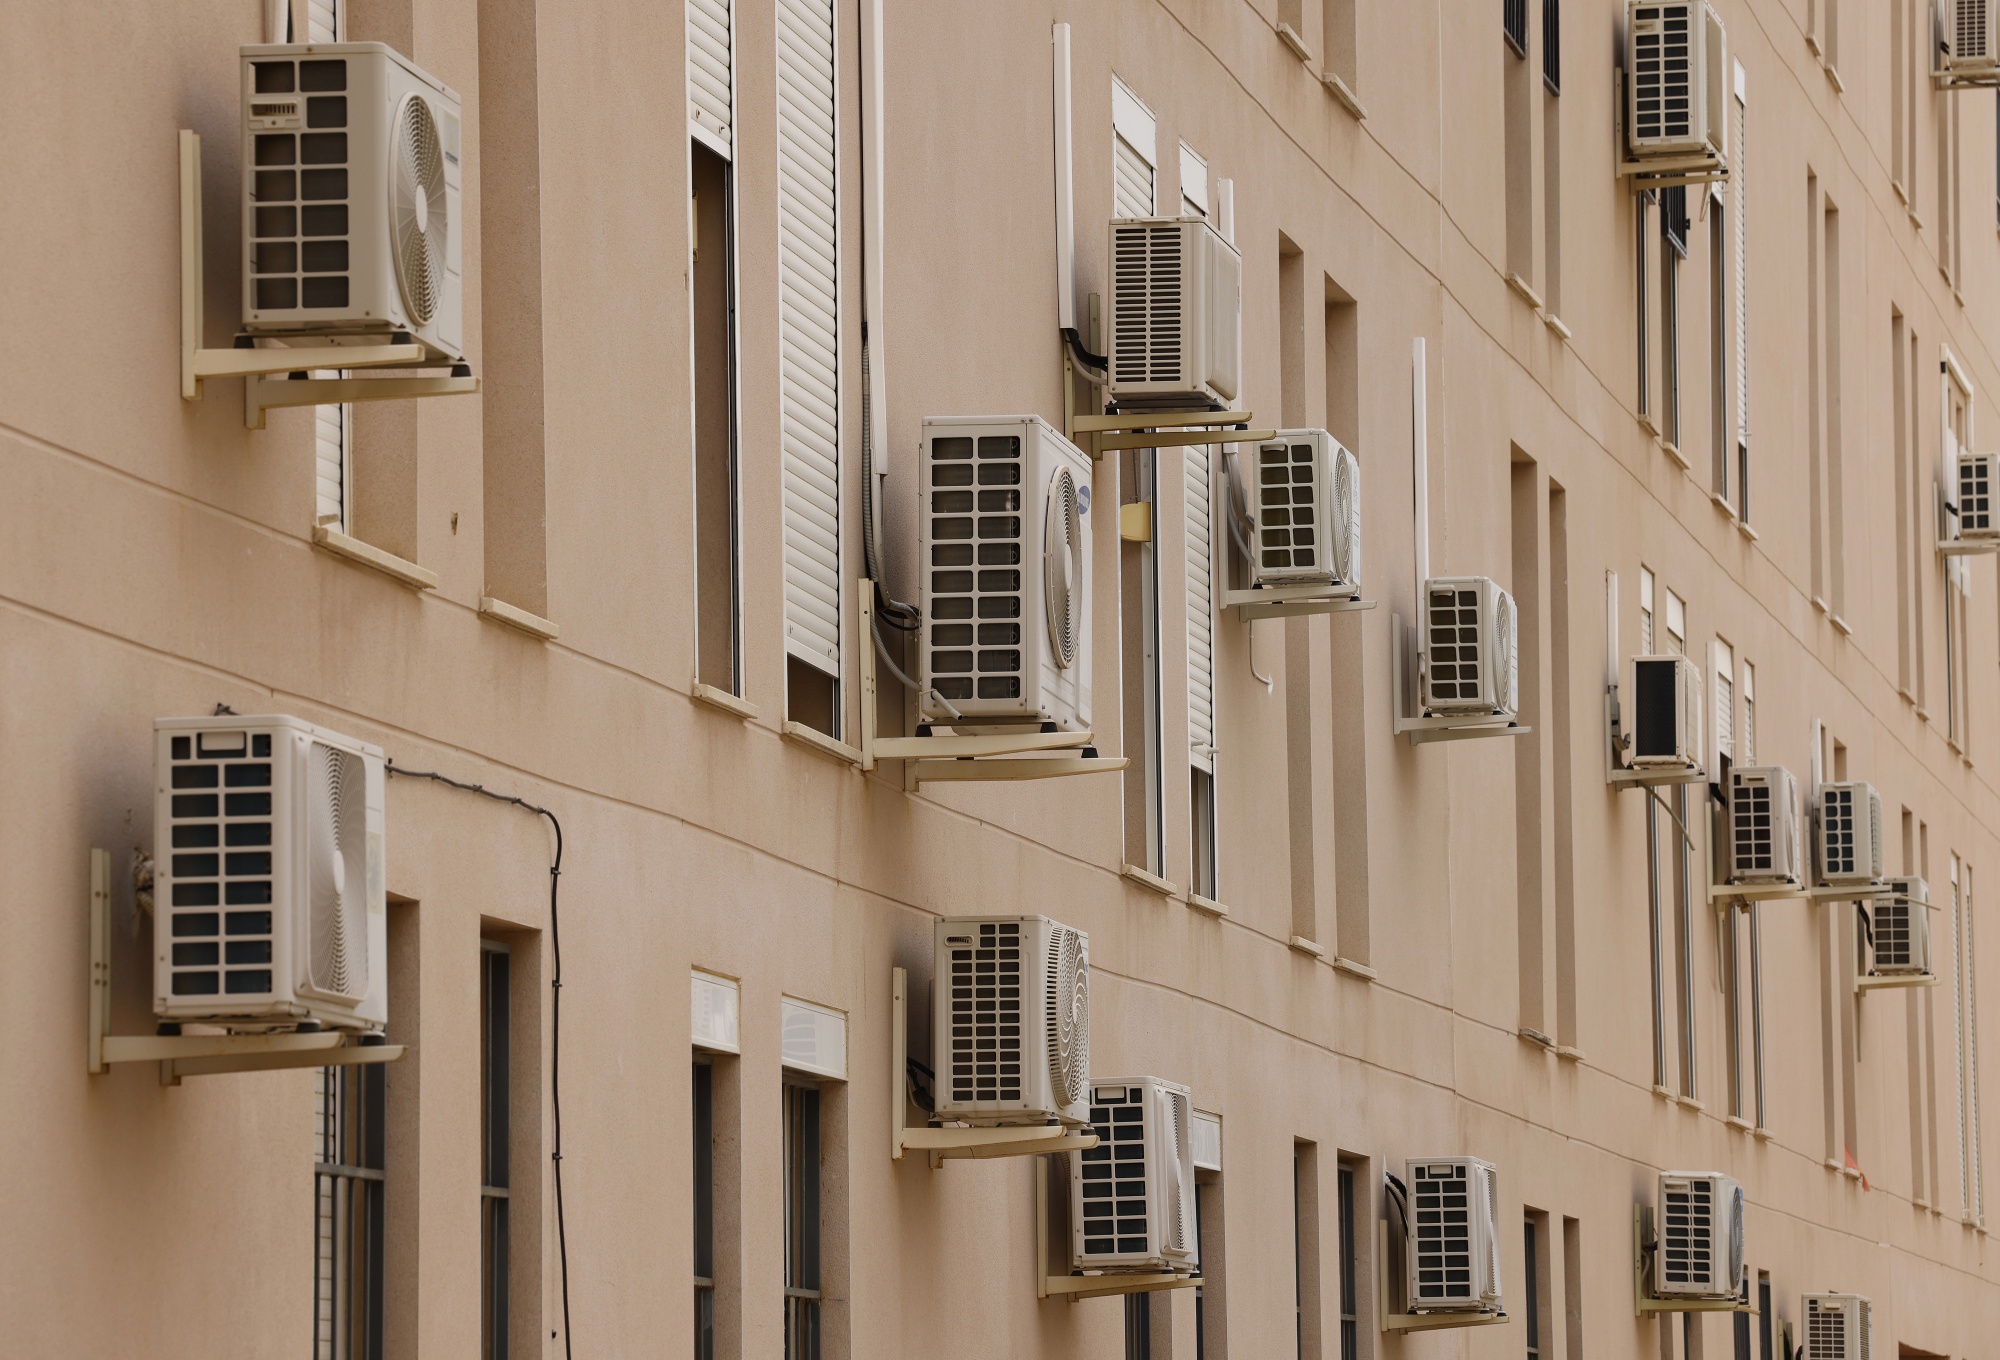 Air-conditioning units on the facade of a building during a heat wave in Seville, Spain, in June.